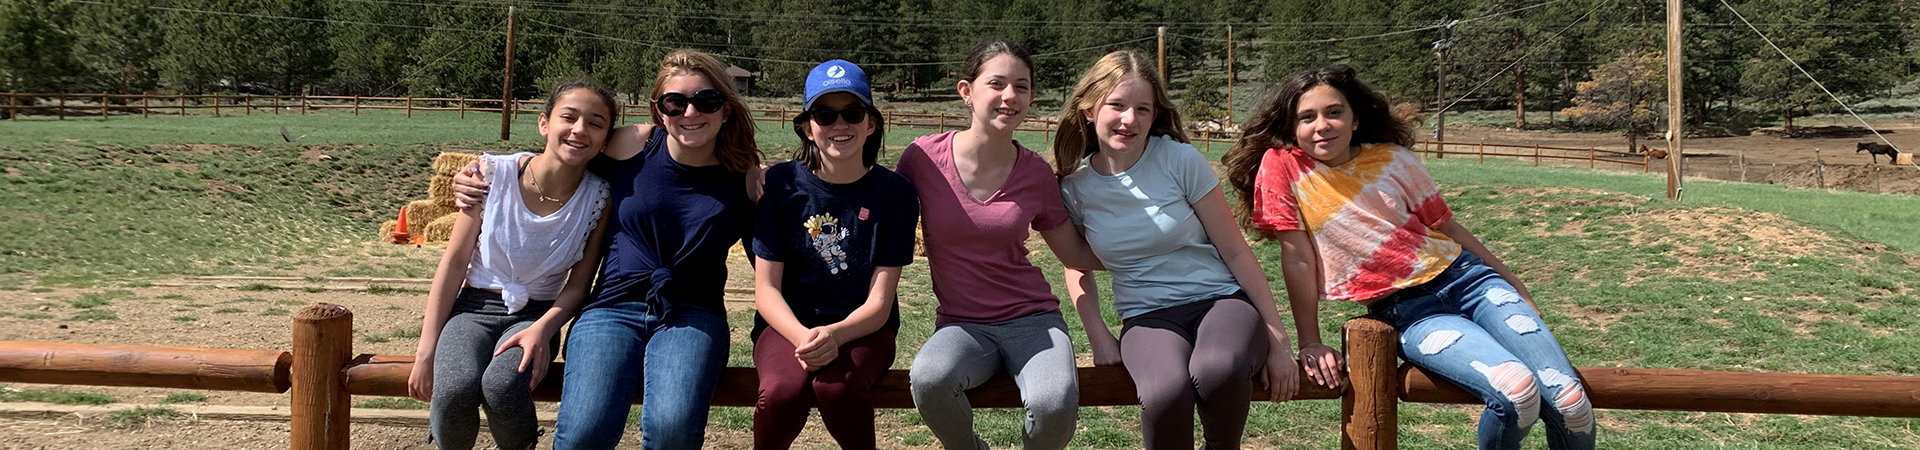  A group of Cadette Girl Scouts sitting on a wooden fence in a rural area 